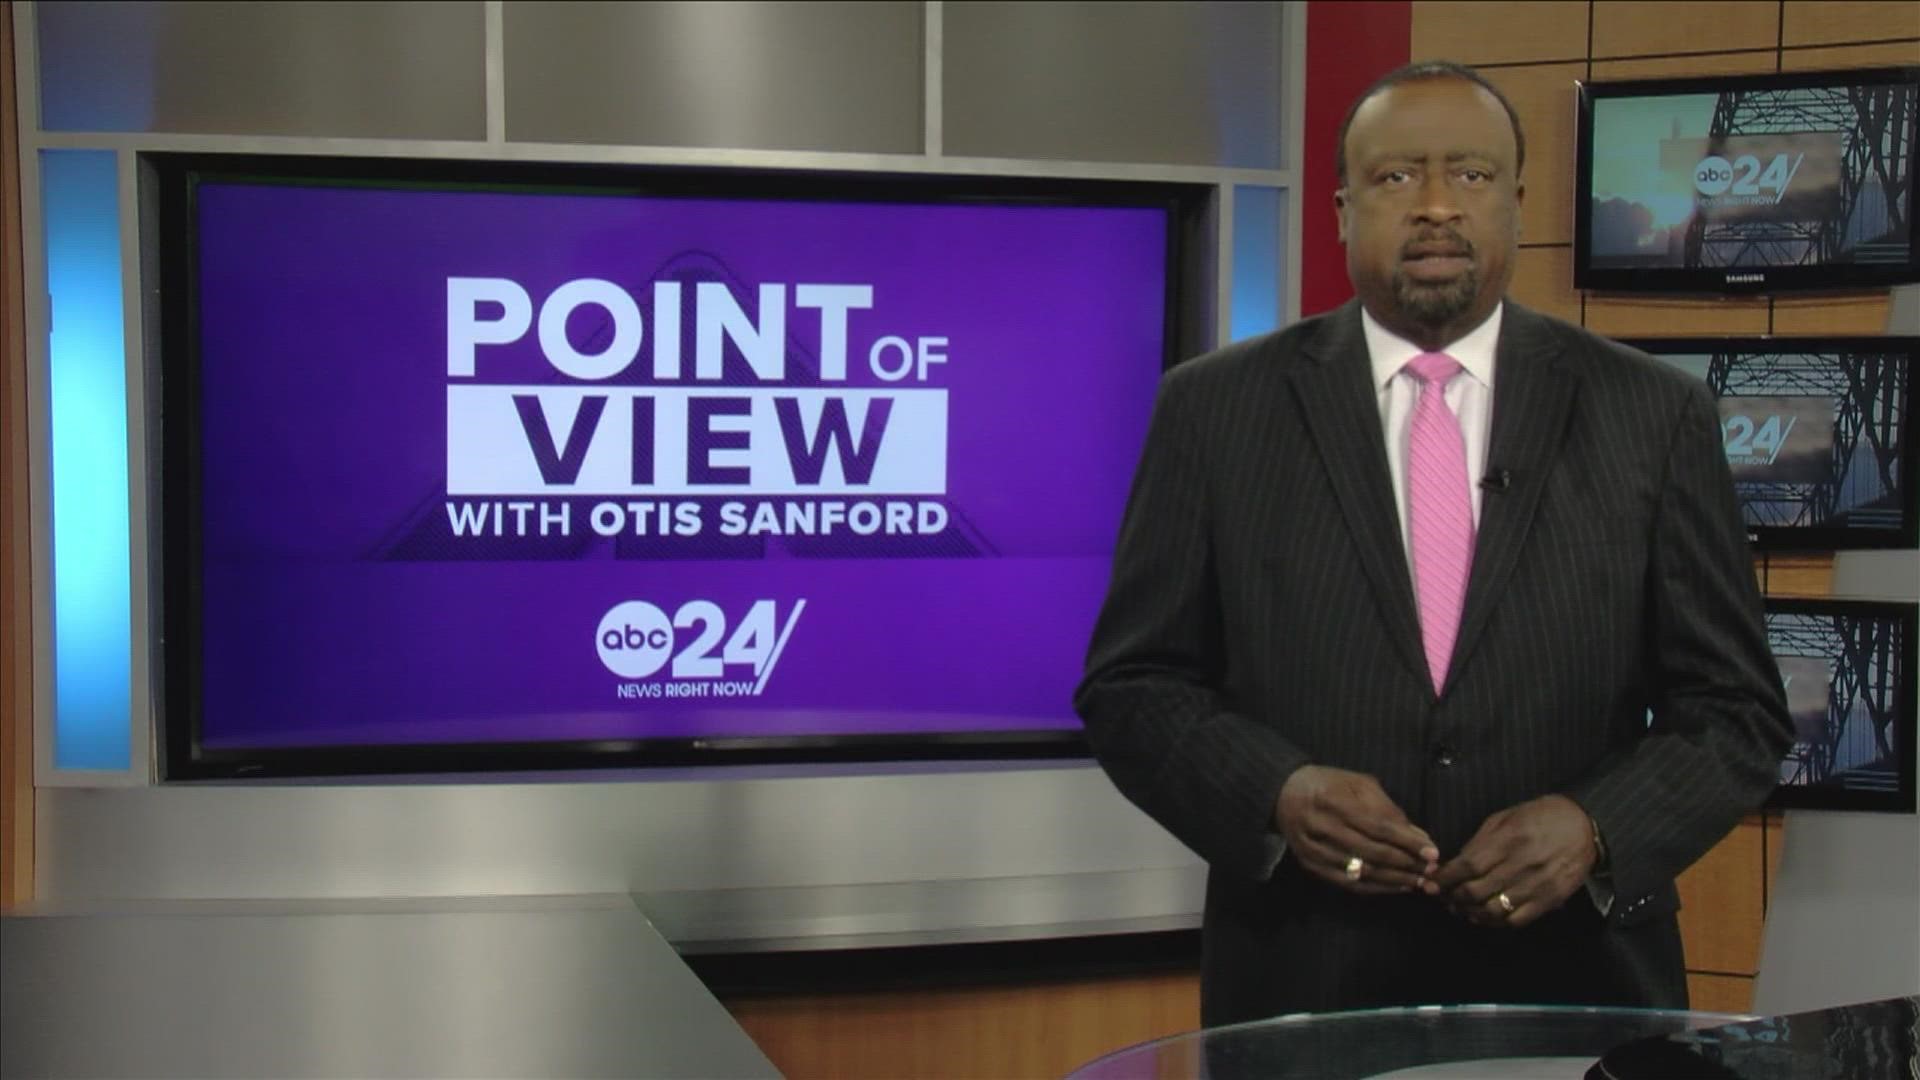 ABC24 political analyst and commentator Otis Sanford shared his point of view on recent mass shootings across the U.S.